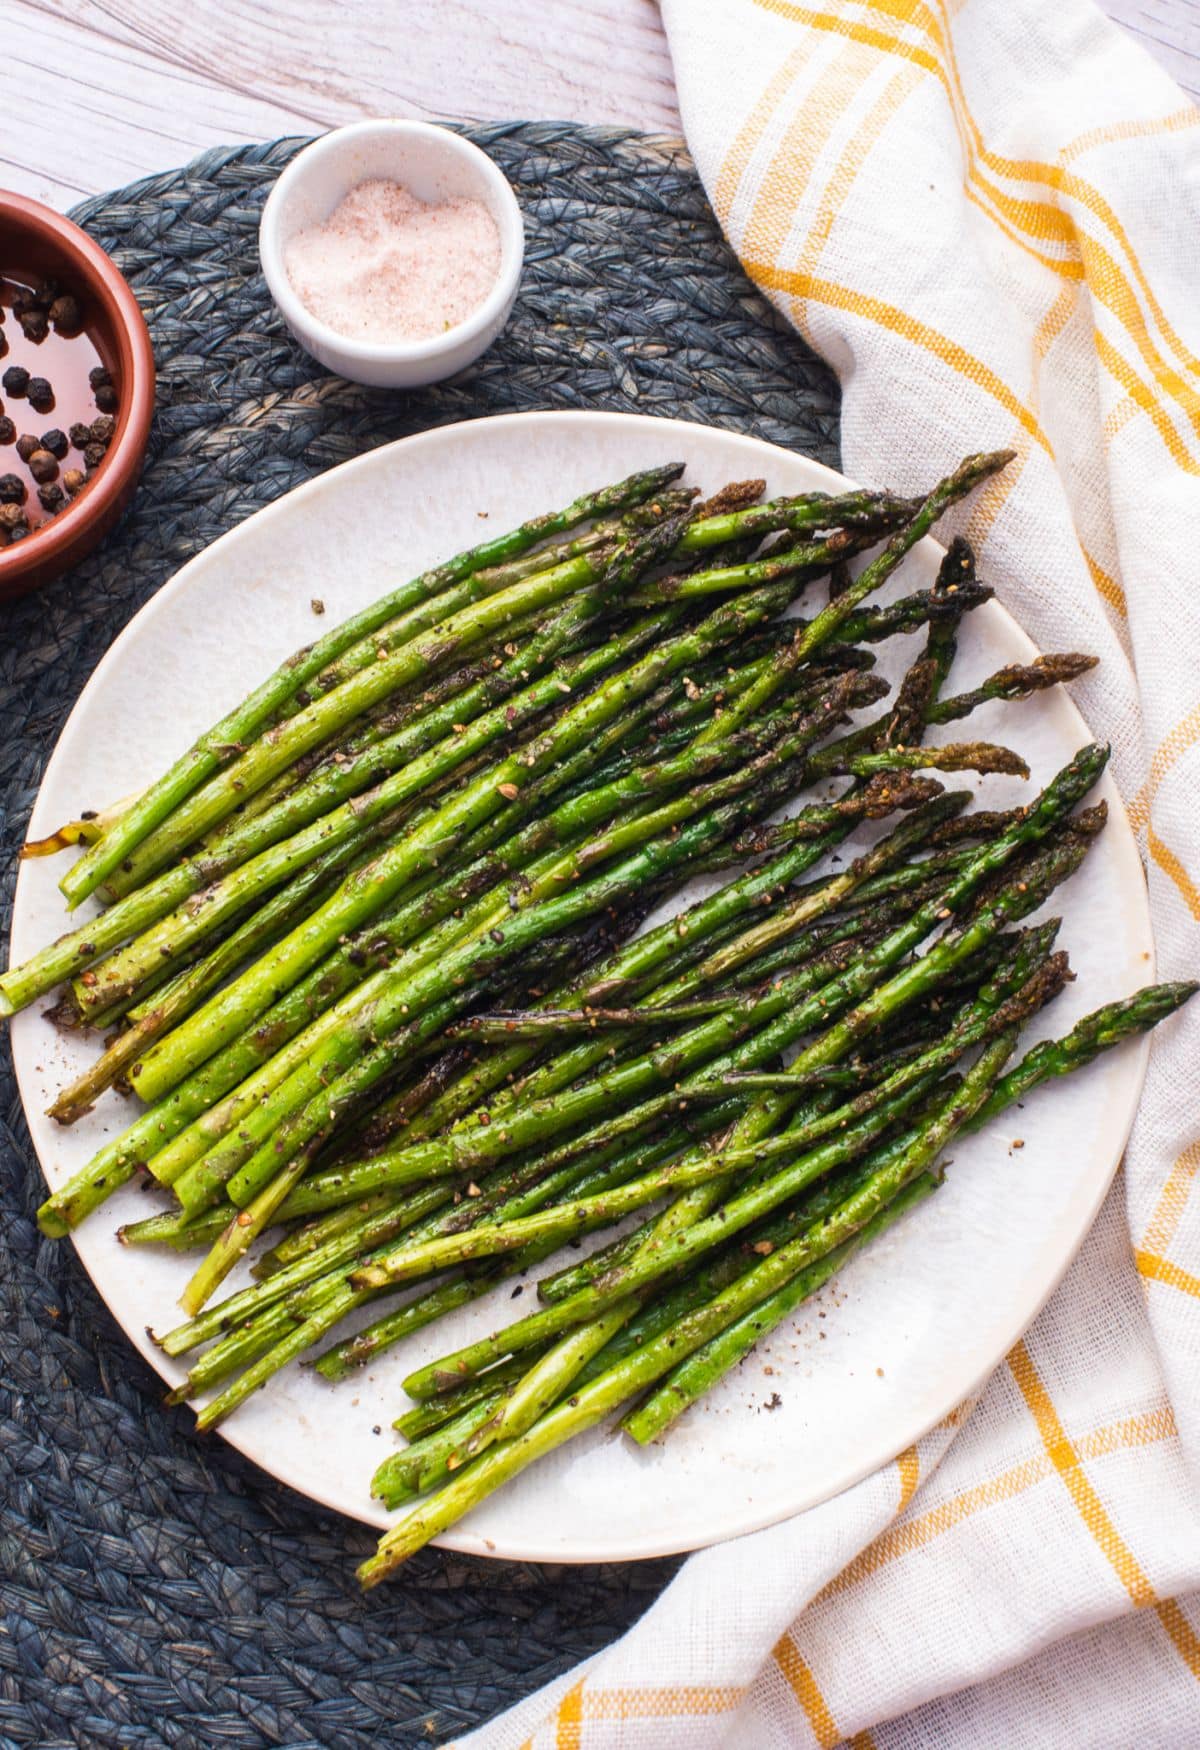 How to cook asparagus 3